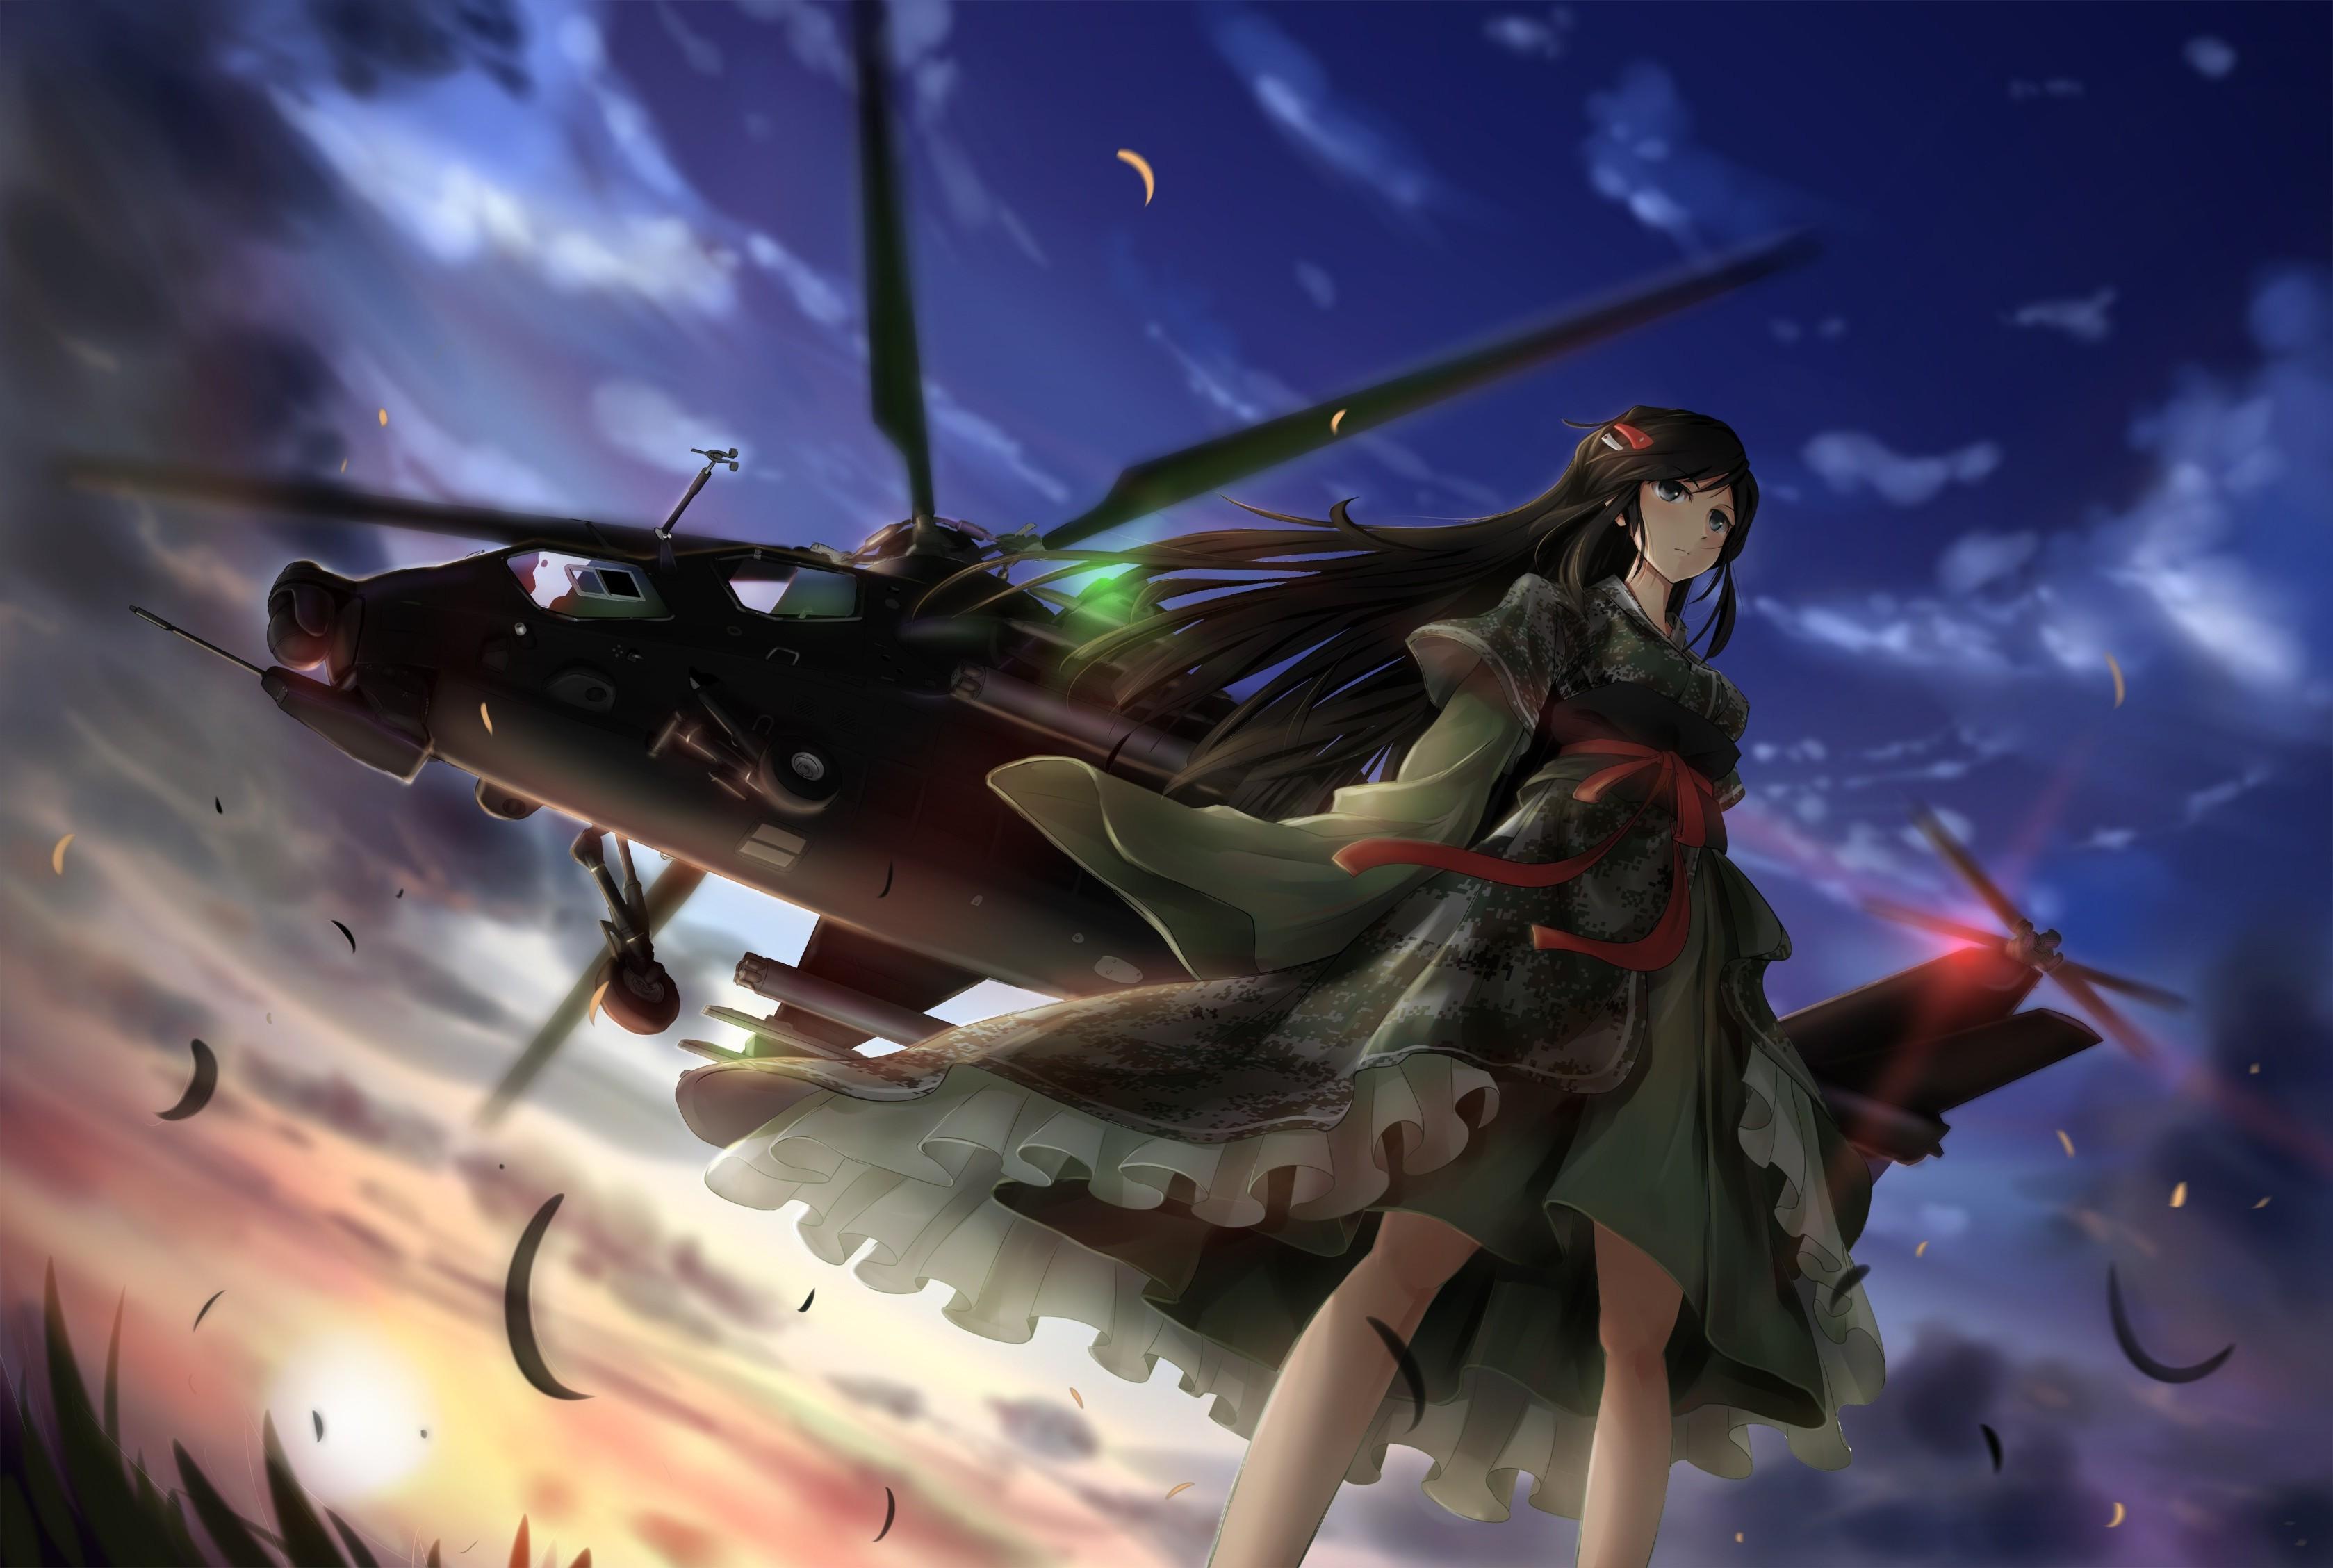 TC Military, Anime Girls, Helicopters Wallpaper HD / Desktop and Mobile Background